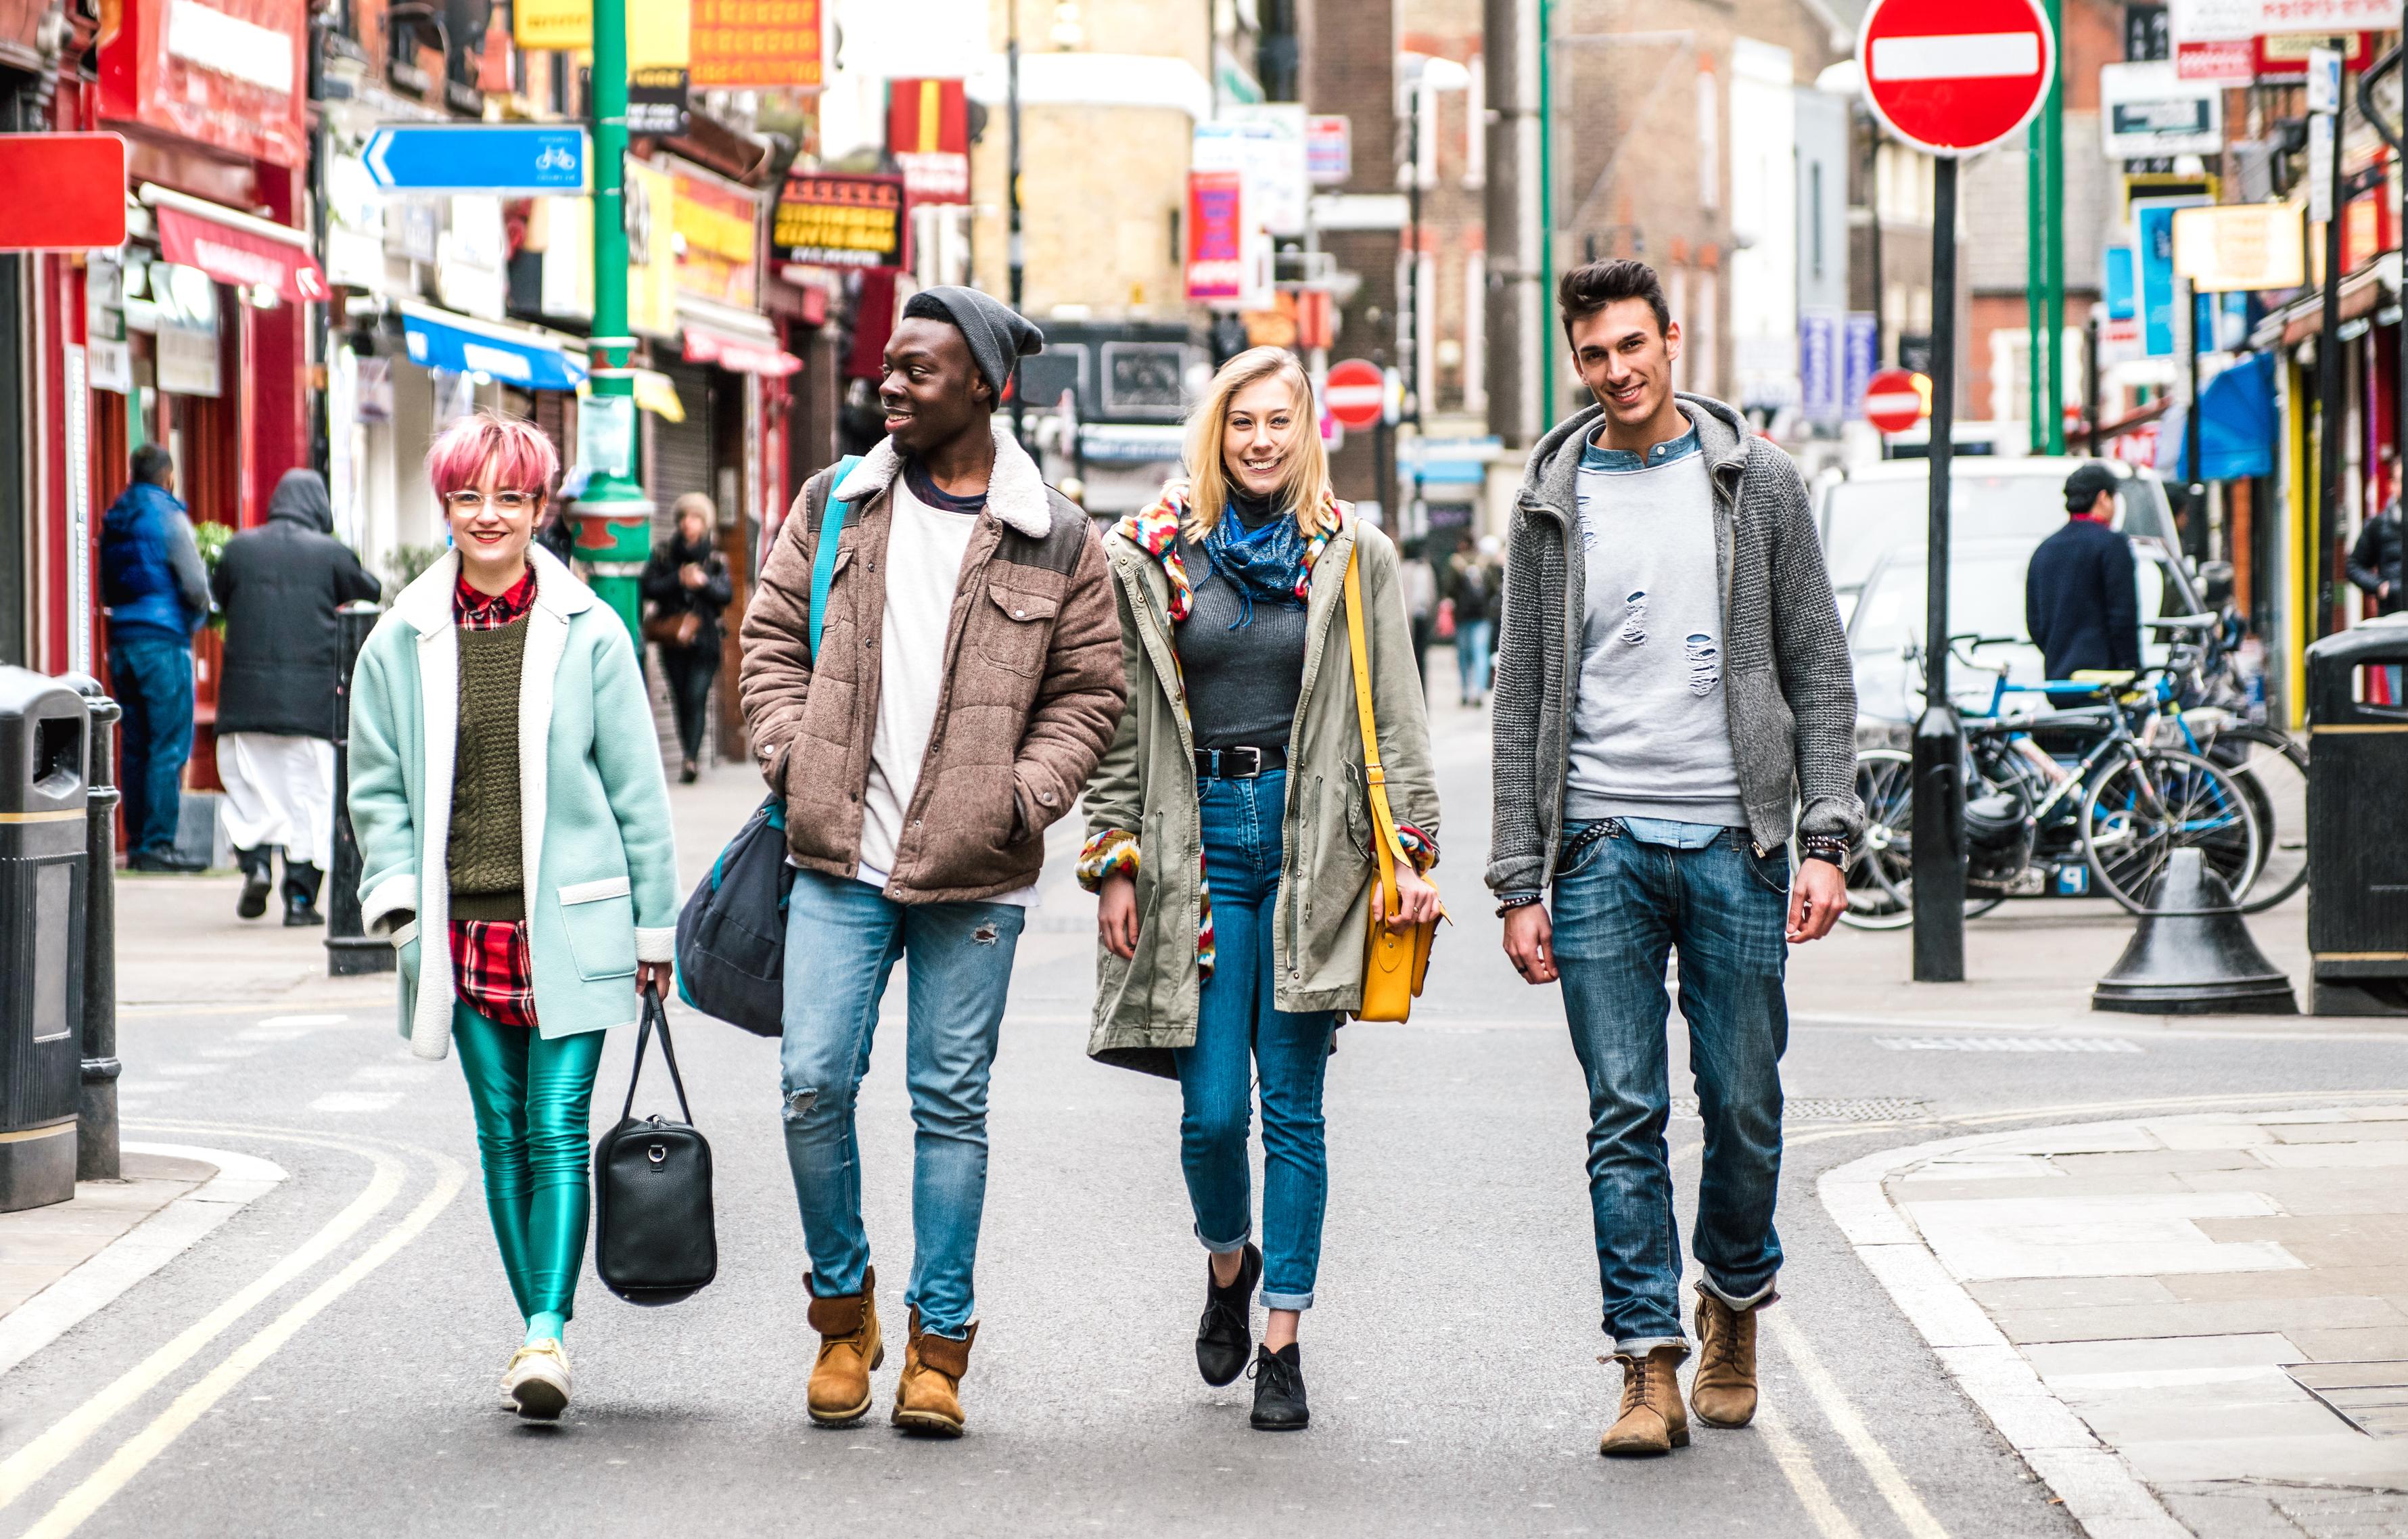  Four students are shopping together at Brick Lane in London. 